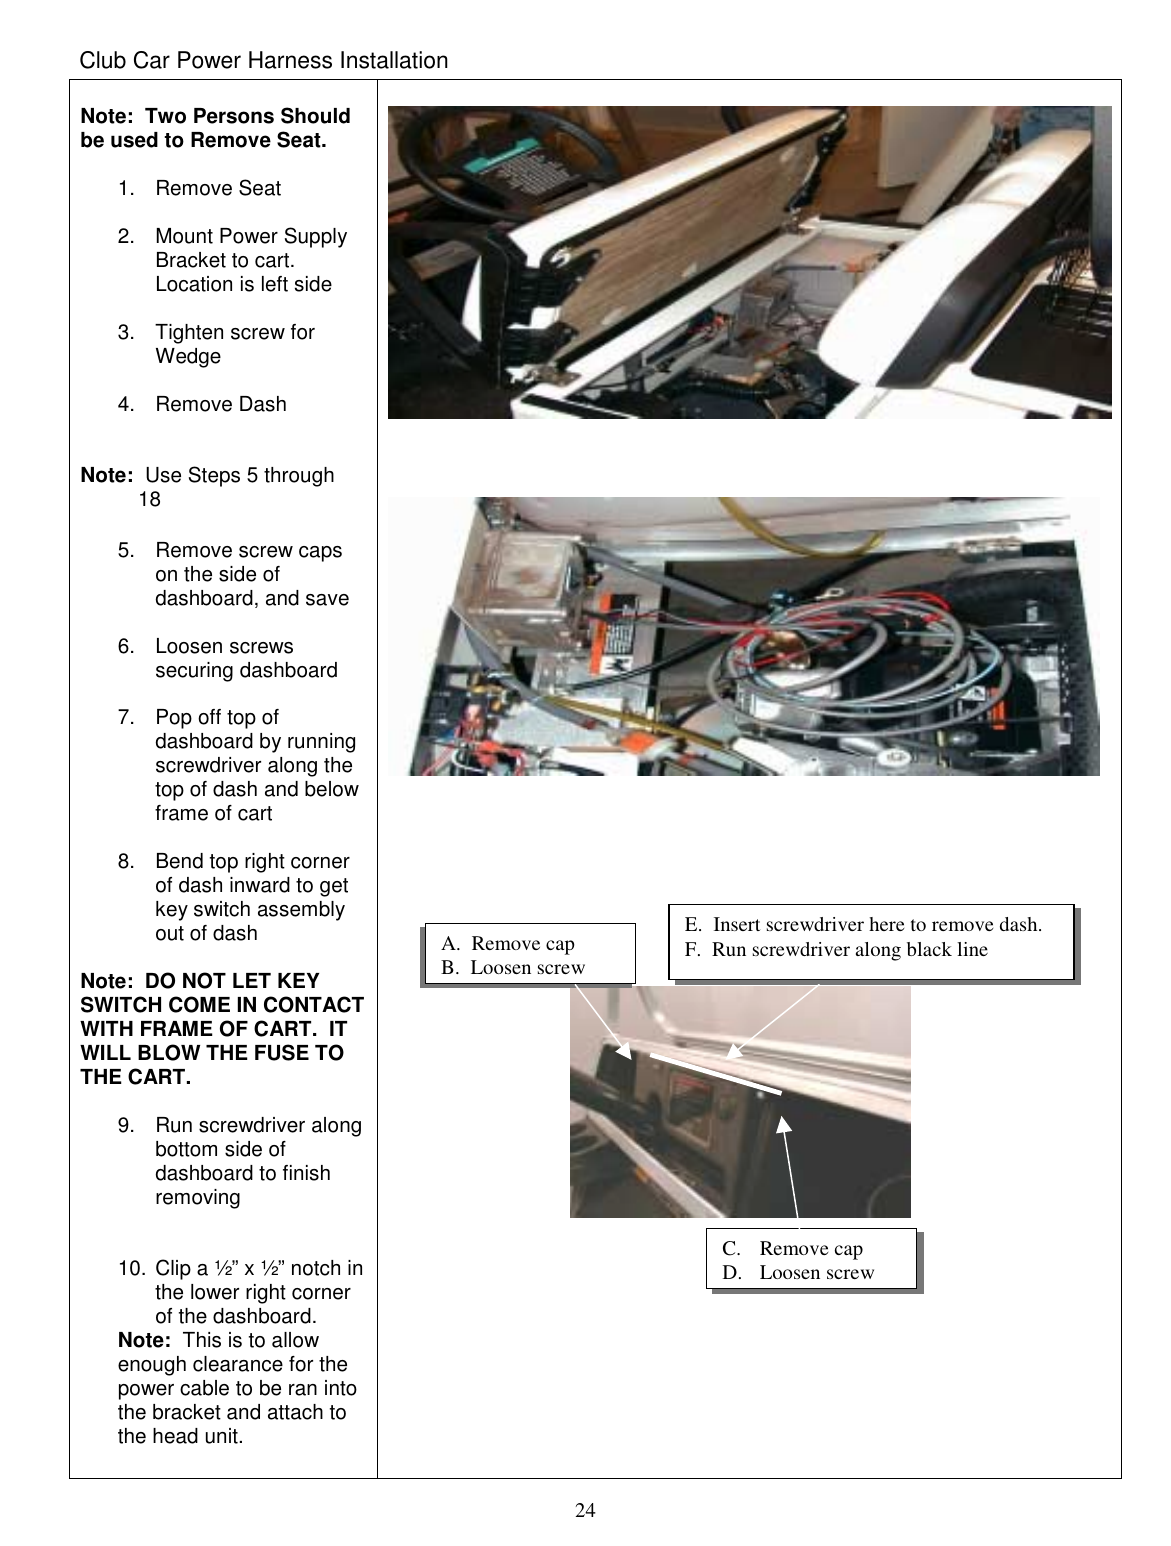  24 Club Car Power Harness Installation  Note:  Two Persons Should be used to Remove Seat.  1. Remove Seat  2. Mount Power Supply Bracket to cart.  Location is left side  3.  Tighten screw for Wedge  4. Remove Dash   Note:  Use Steps 5 through            18  5.  Remove screw caps on the side of dashboard, and save  6. Loosen screws securing dashboard  7.  Pop off top of dashboard by running screwdriver along the top of dash and below frame of cart  8.  Bend top right corner of dash inward to get key switch assembly out of dash  Note:  DO NOT LET KEY SWITCH COME IN CONTACT WITH FRAME OF CART.  IT WILL BLOW THE FUSE TO THE CART.  9. Run screwdriver along bottom side of dashboard to finish removing   10. Clip a ½” x ½” notch in the lower right corner of the dashboard.   Note:  This is to allow enough clearance for the power cable to be ran into the bracket and attach to the head unit.                                                                                                                      A.  Remove cap B.  Loosen screw E.  Insert screwdriver here to remove dash.  F.  Run screwdriver along black line C. Remove cap D. Loosen screw 